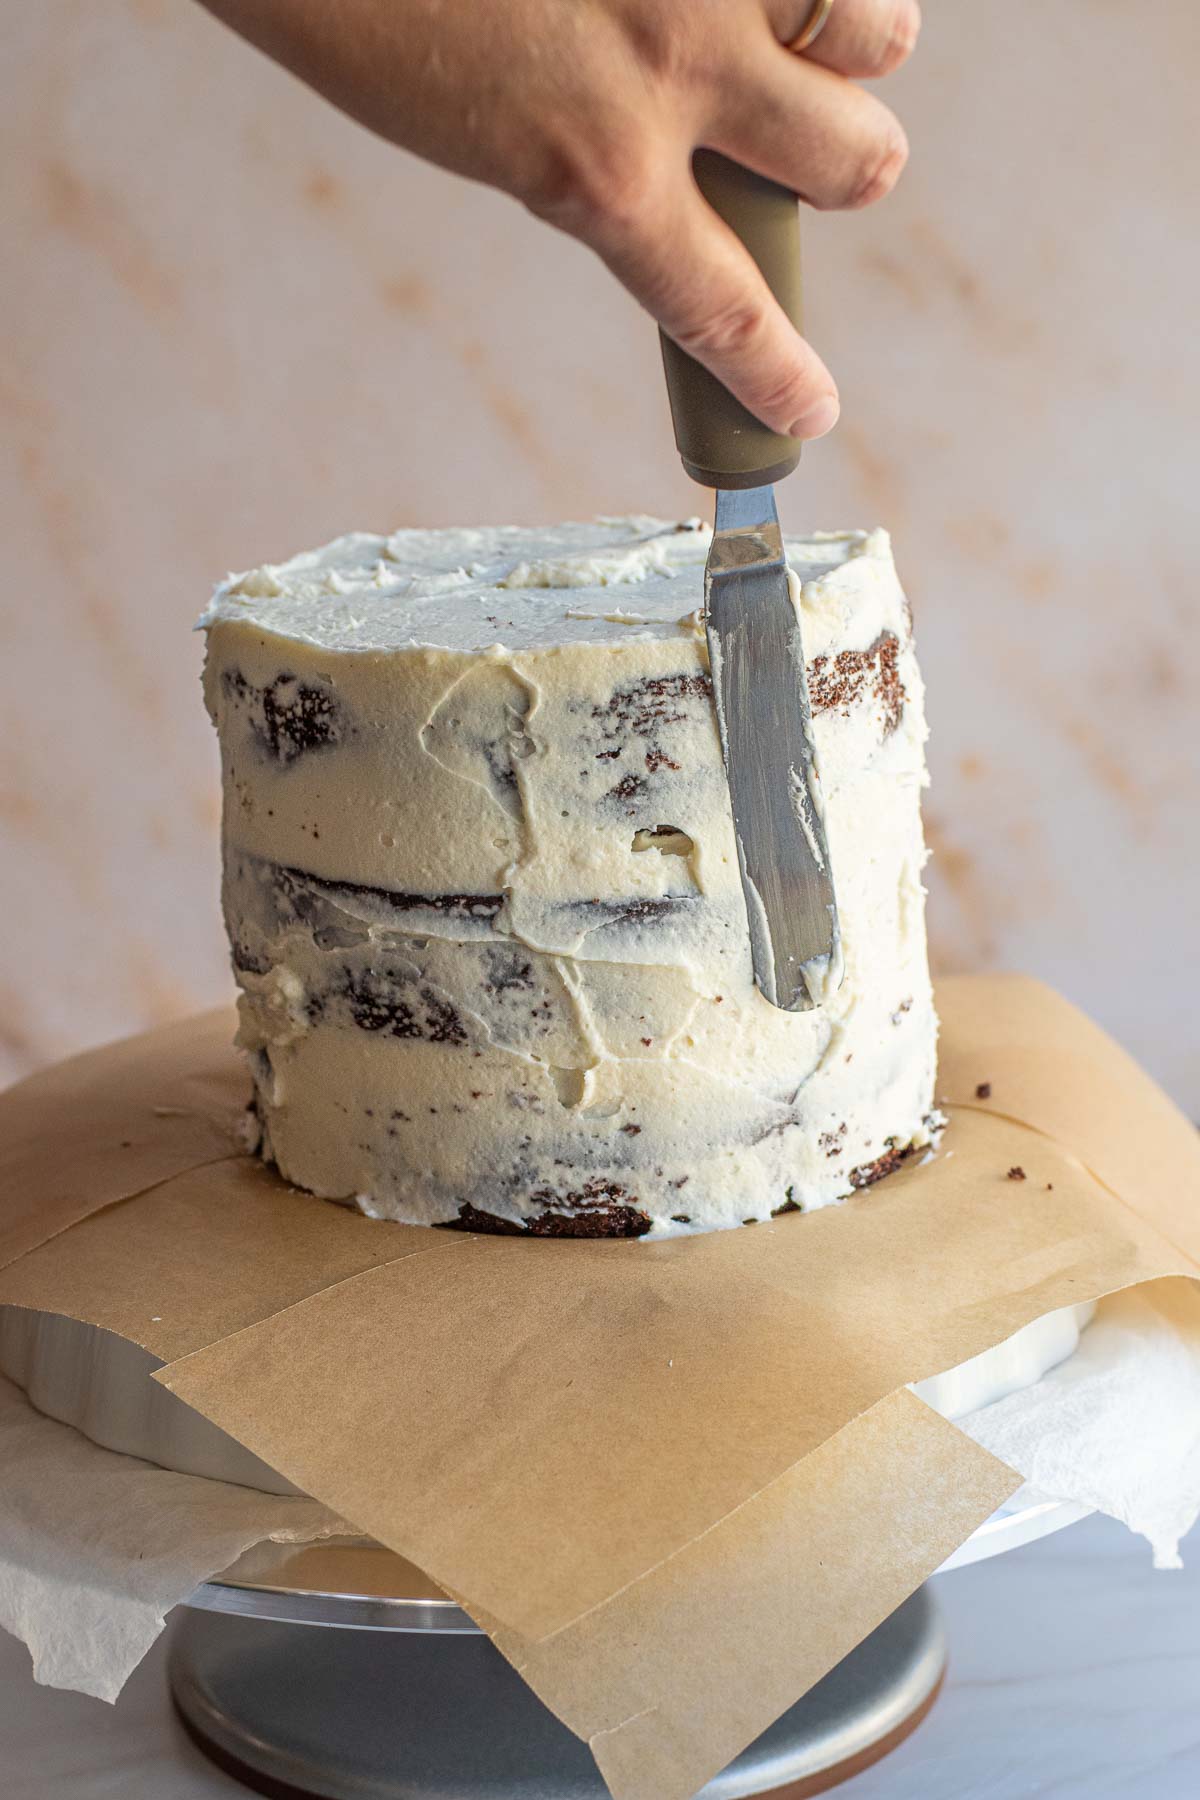 A hand spreads cream cheese frosting to cover the assembled cake.